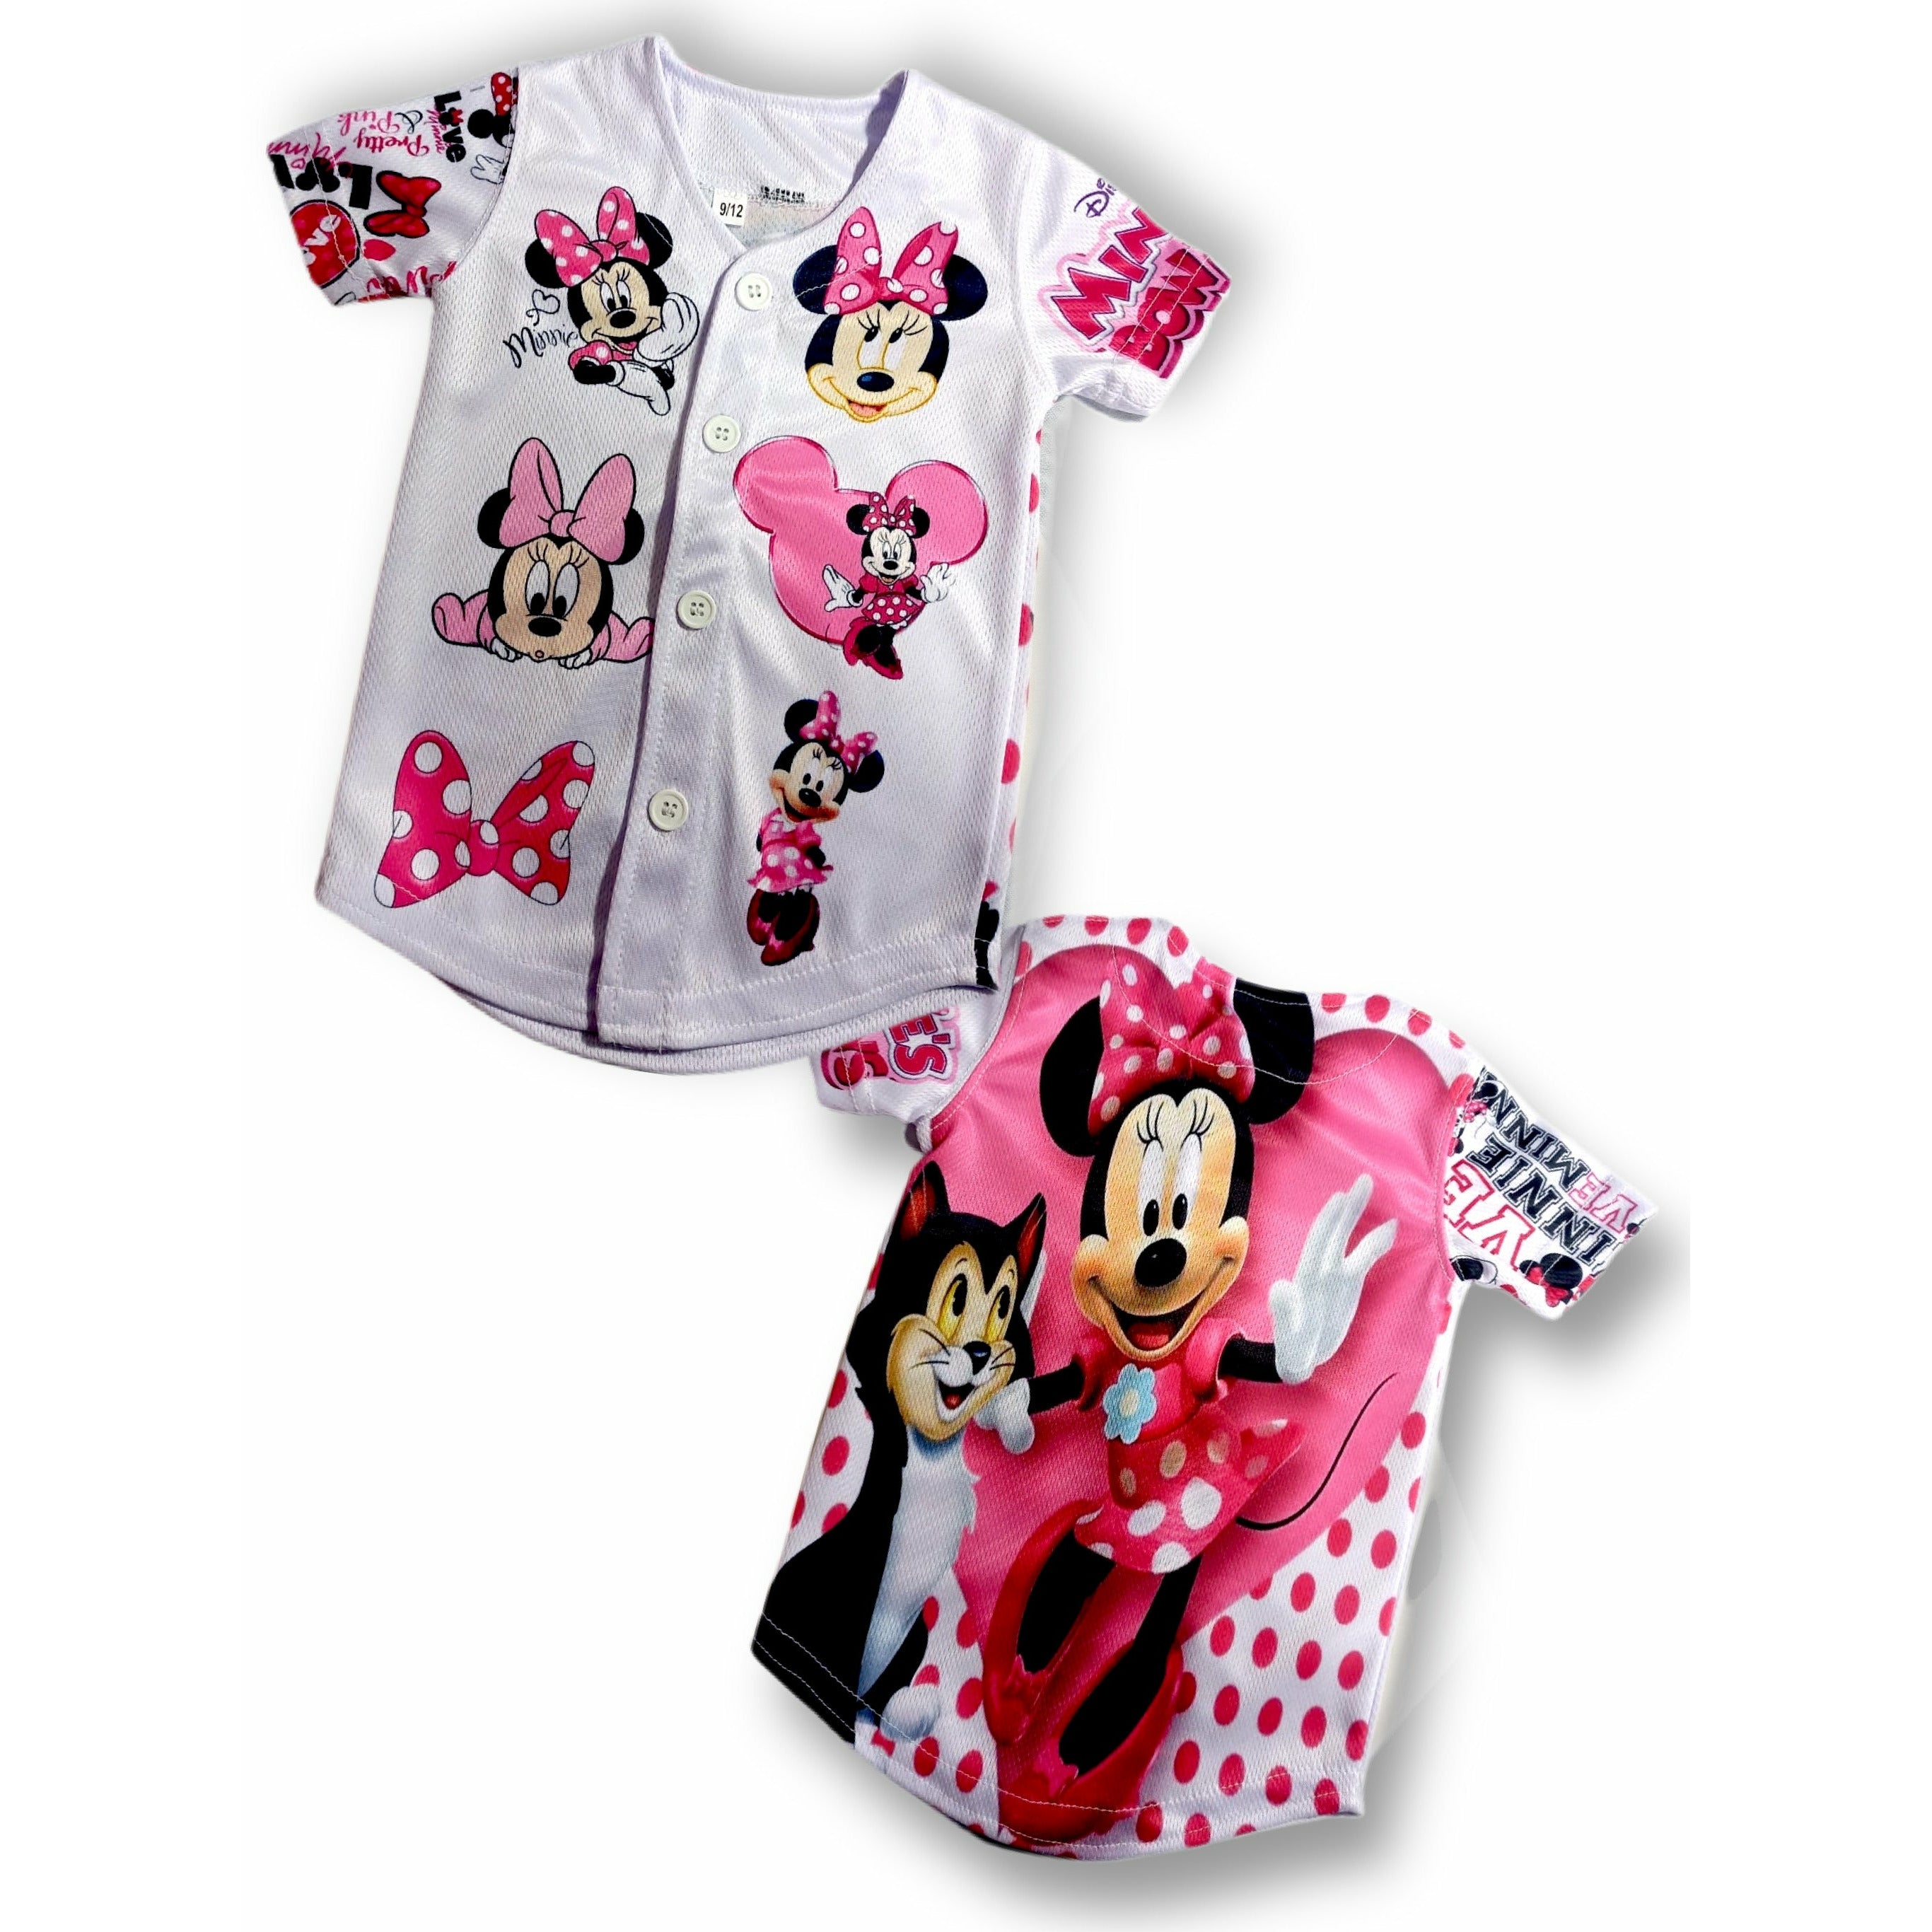 Women's Minnie Mouse Jersey - DimiRogue